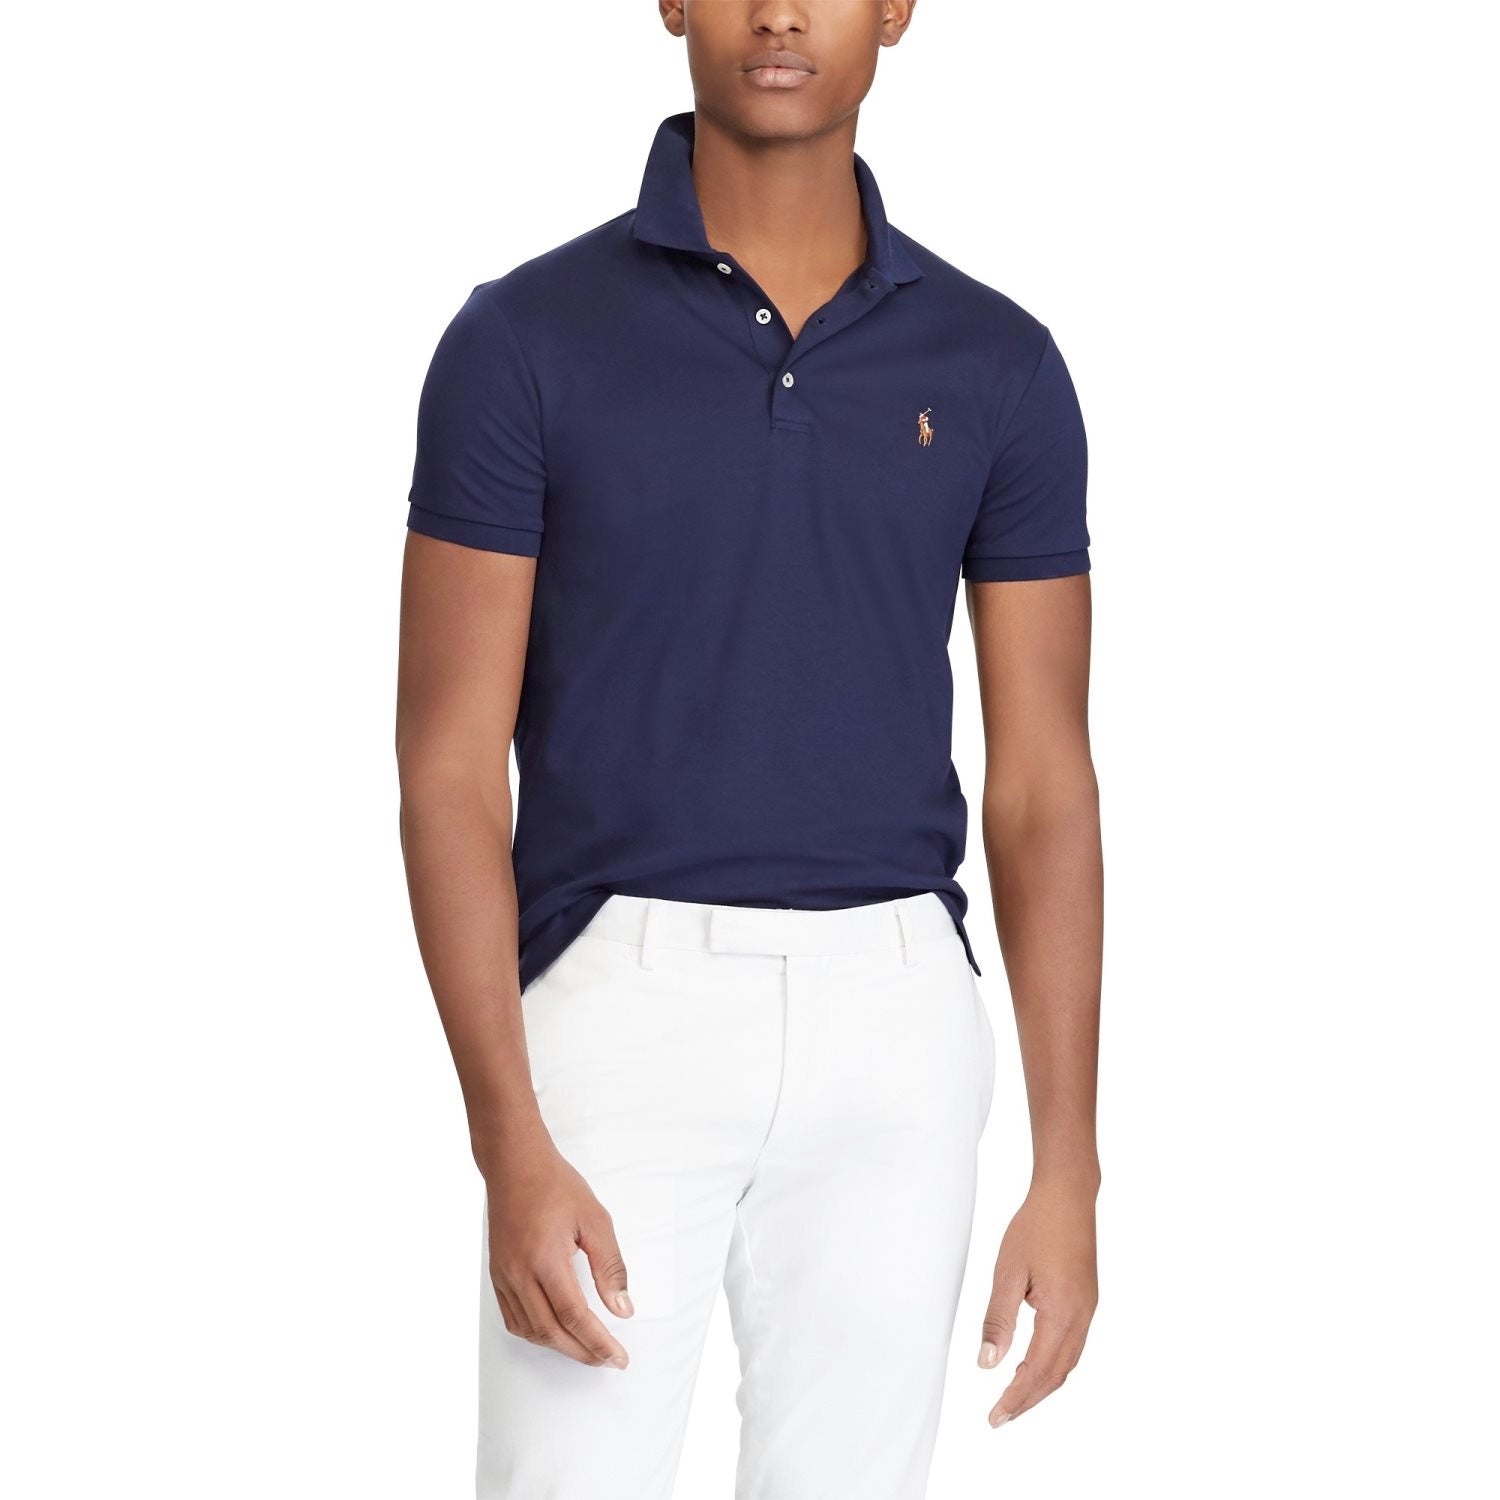 An American style standard since 1972, the Polo shirt has been imitated but never matched. Over the decades, Ralph Lauren has reimagined his signature style in a wide array of colors and fits, yet all retain the quality and attention to detail of the iconic original. This slim version is made from luxe cotton interlock with an ultrasoft finish.